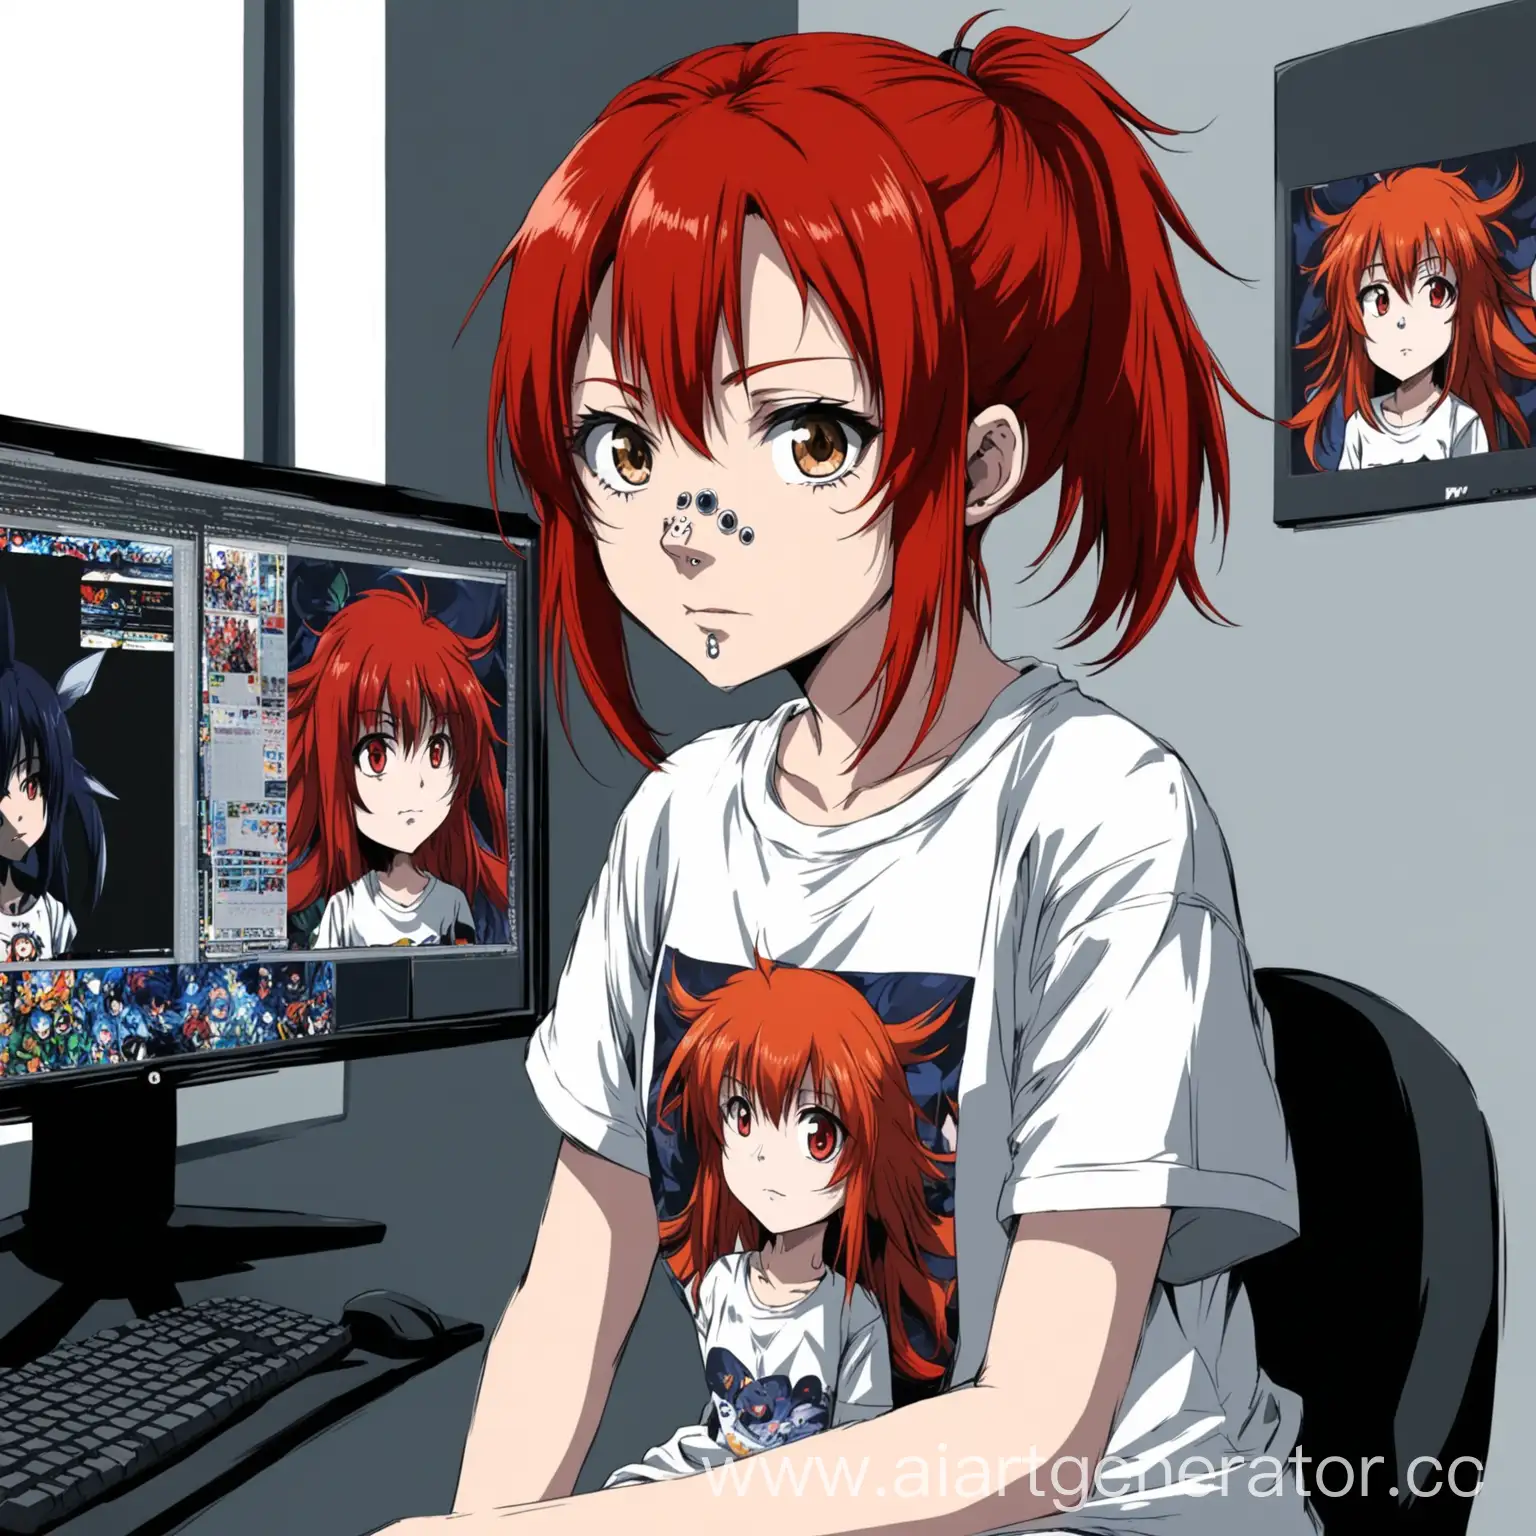 Anime-Style-Girl-with-Red-Hair-Sitting-at-Monitor-in-White-TShirt